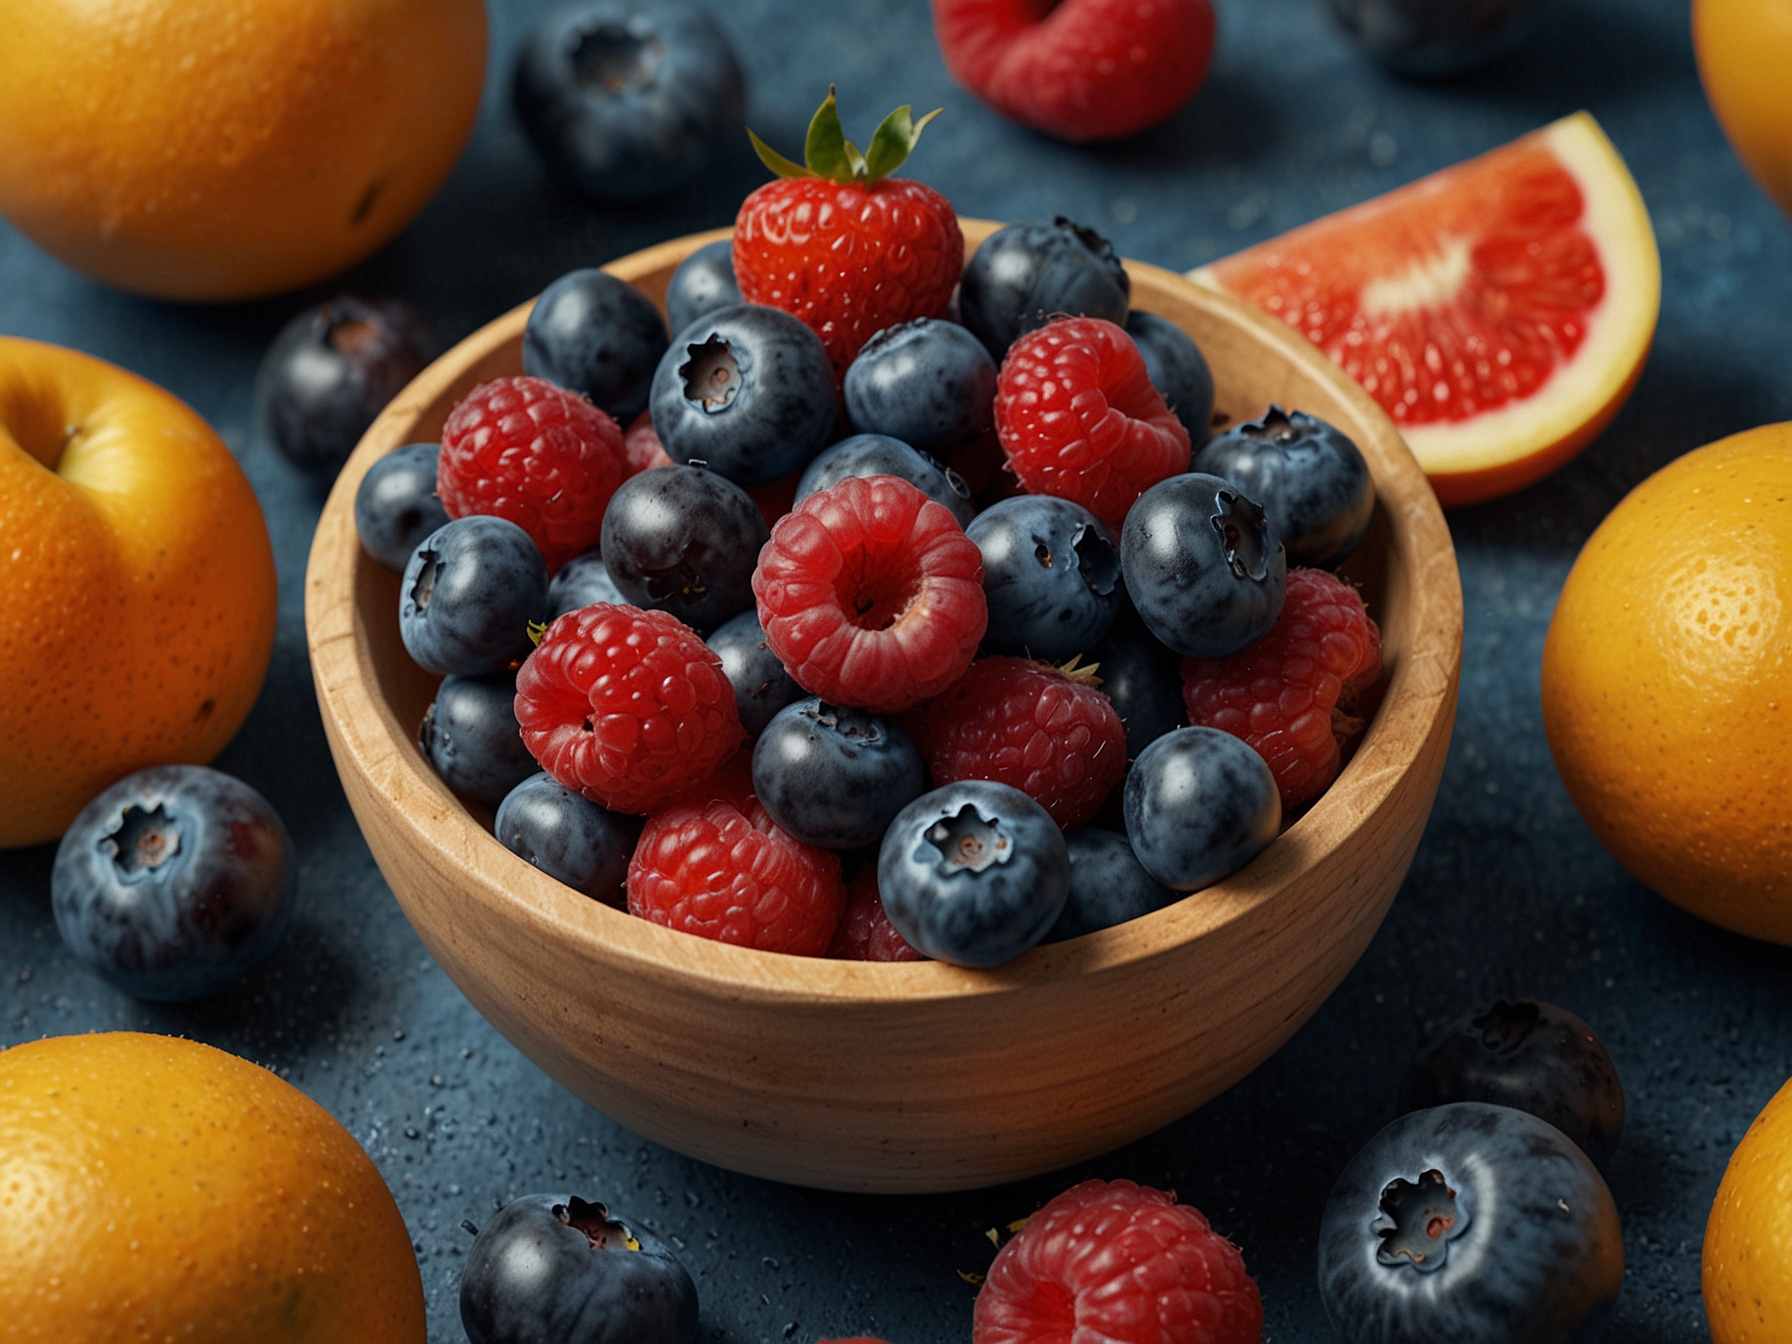 A vibrant image showcasing a bowl of fresh blueberries, surrounded by other summer fruits, emphasizing the joy of indulging in healthy, delicious snacks during the sweepstakes.